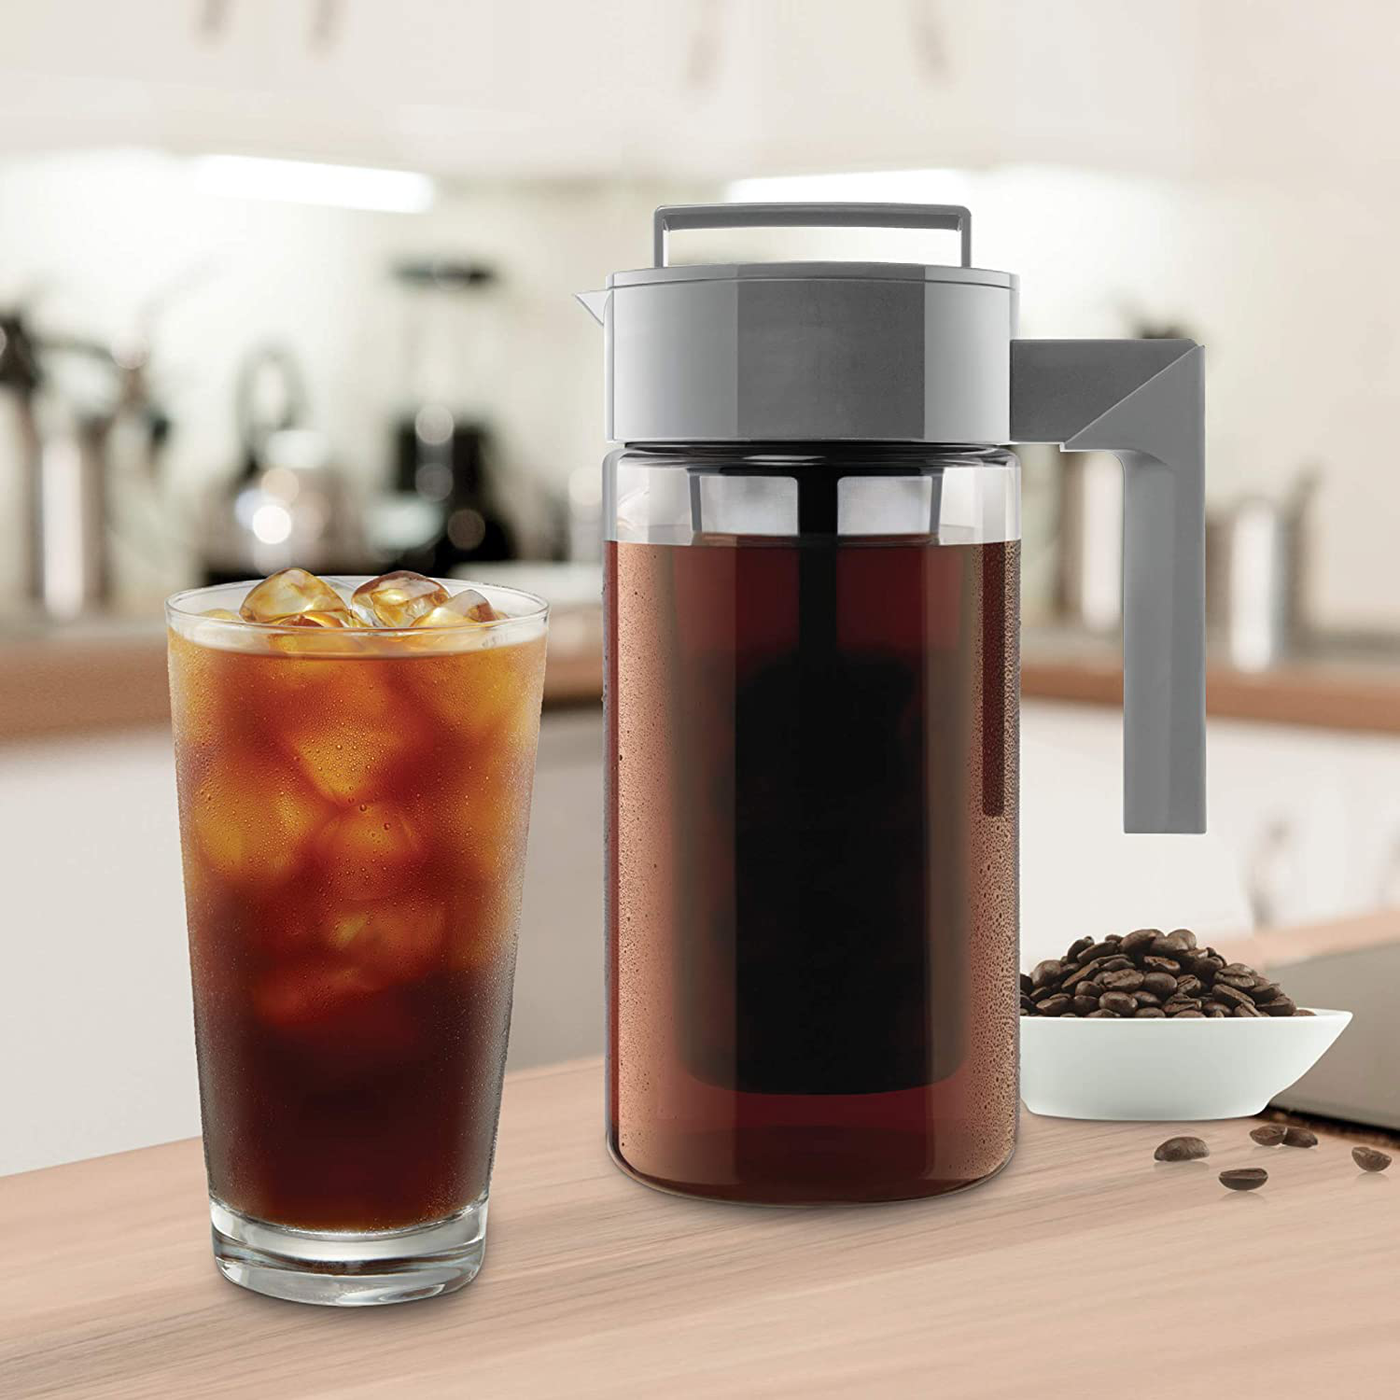 TAKEYA Patented Deluxe Cold Brew Coffee Maker, One Quart, Black